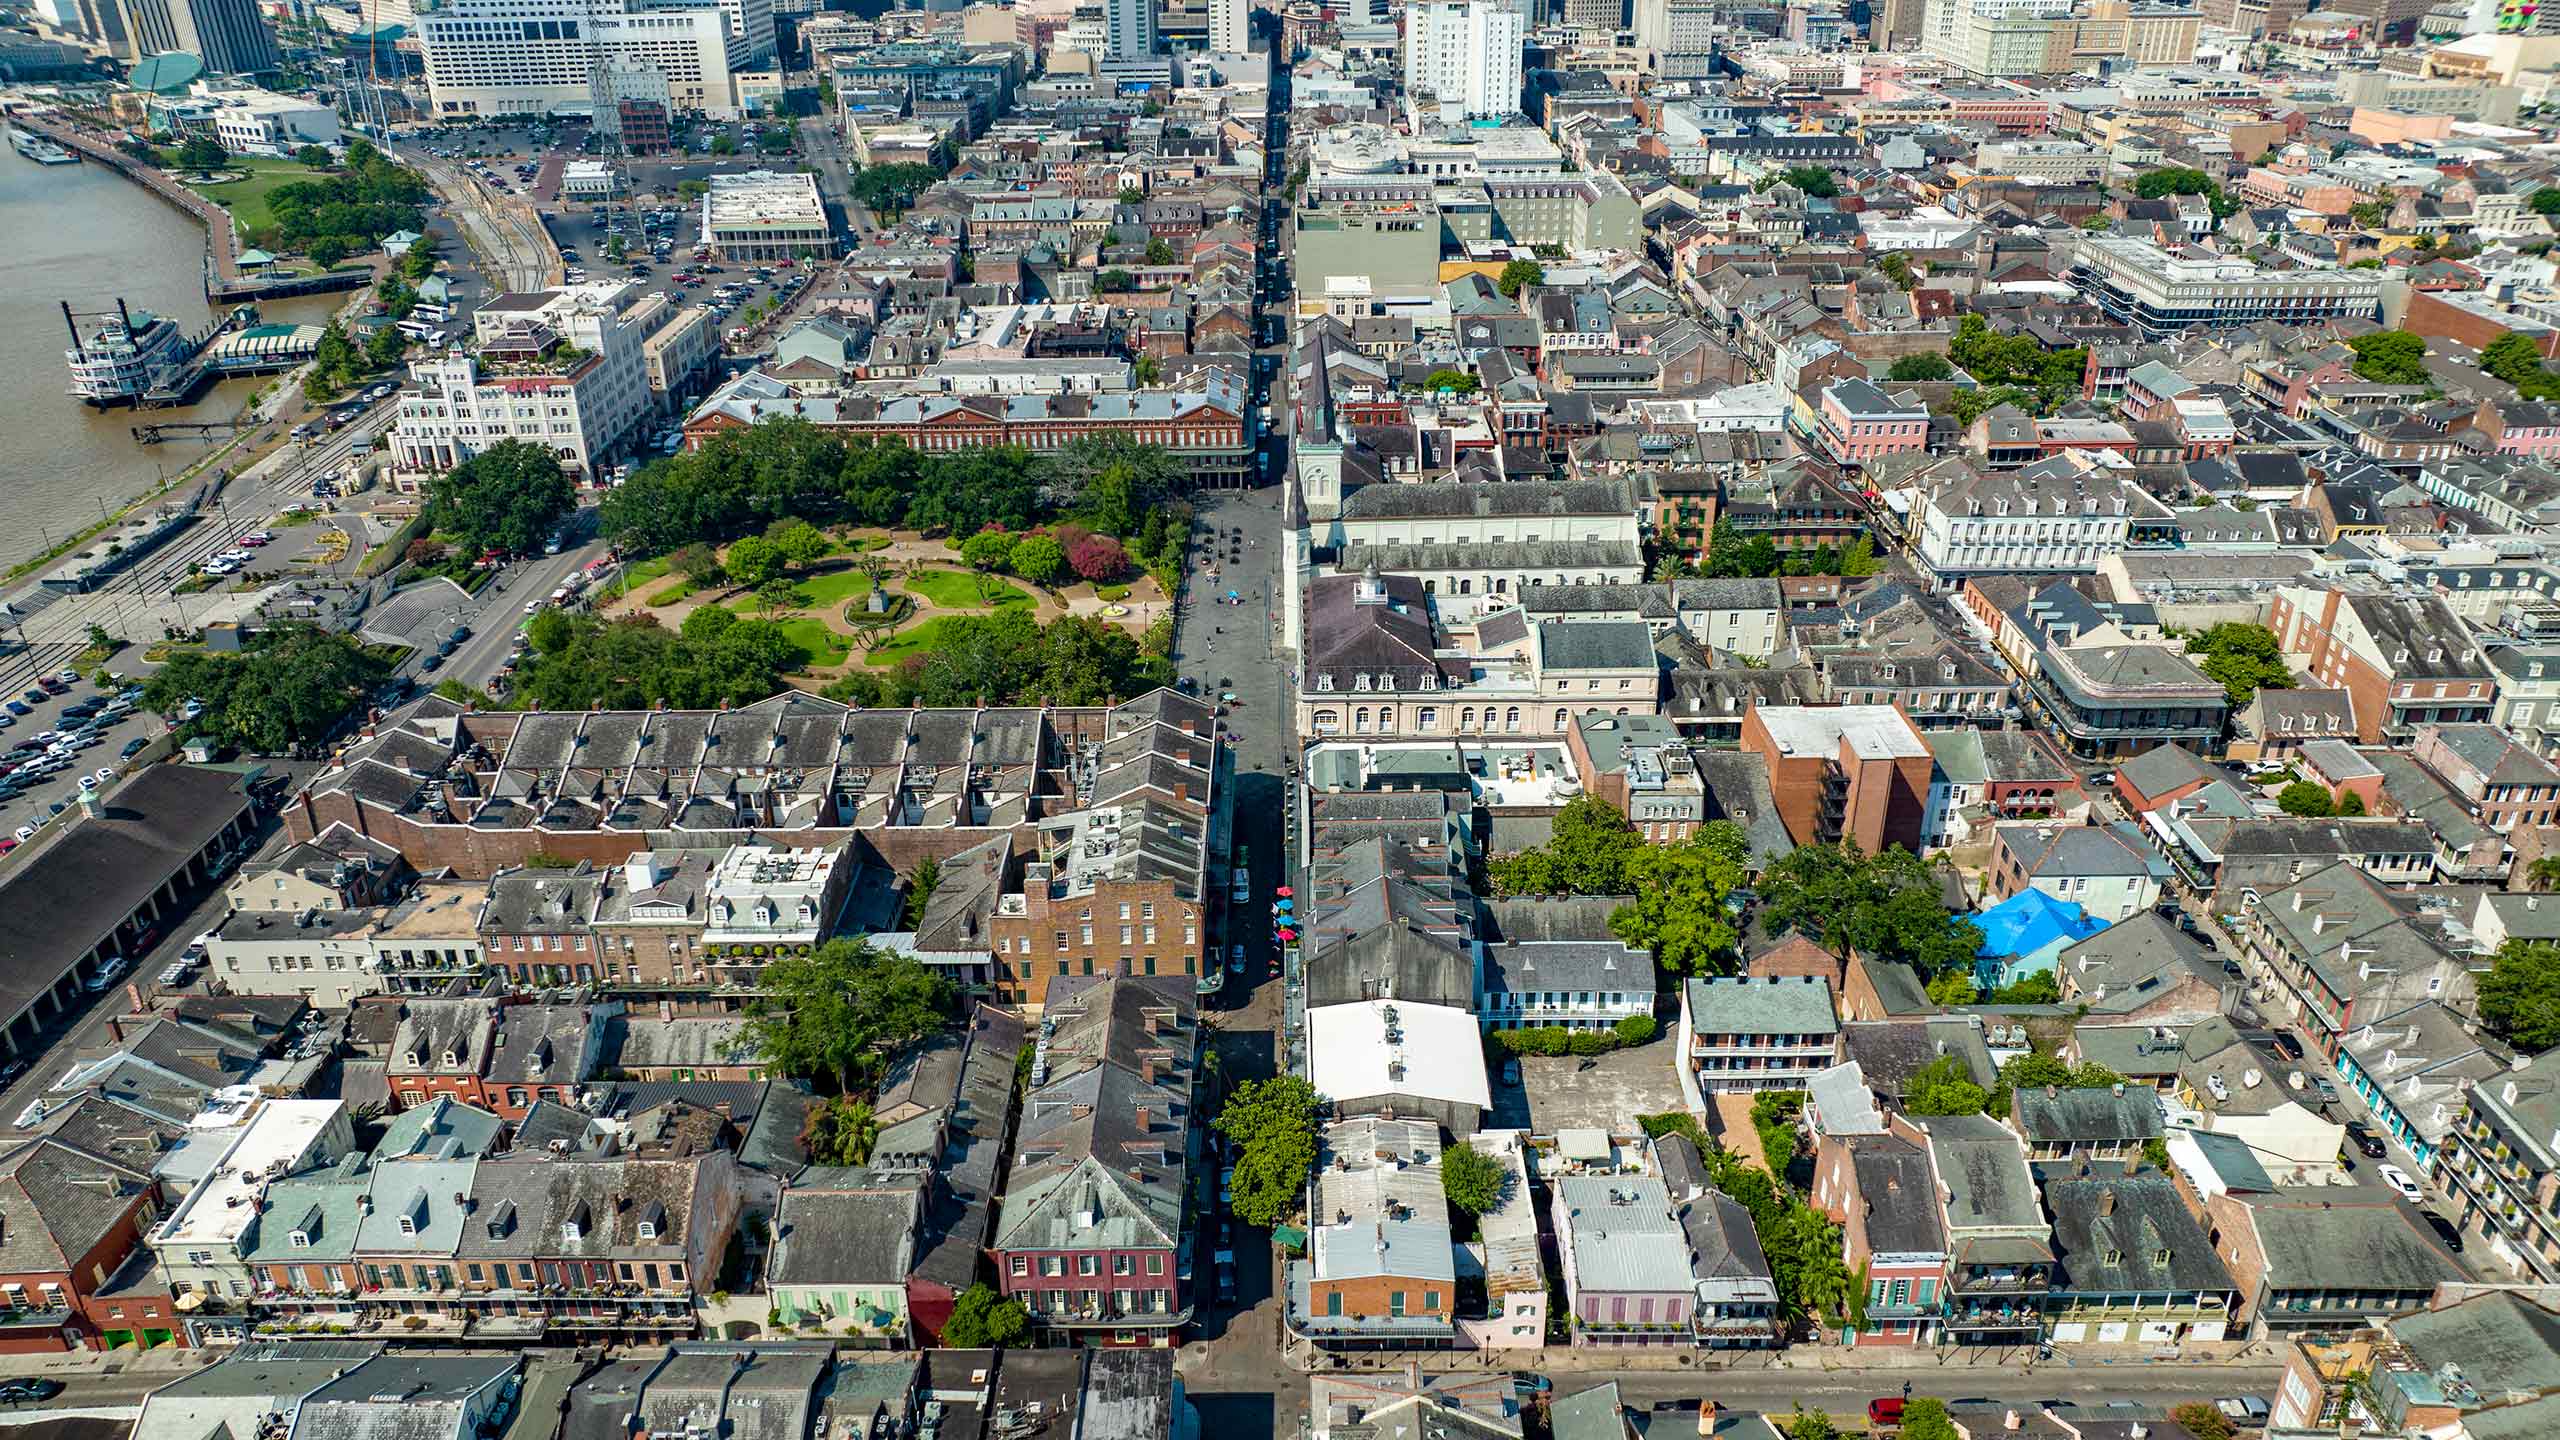 New Orleans French Quarter drone shot looking toward the Central Business District